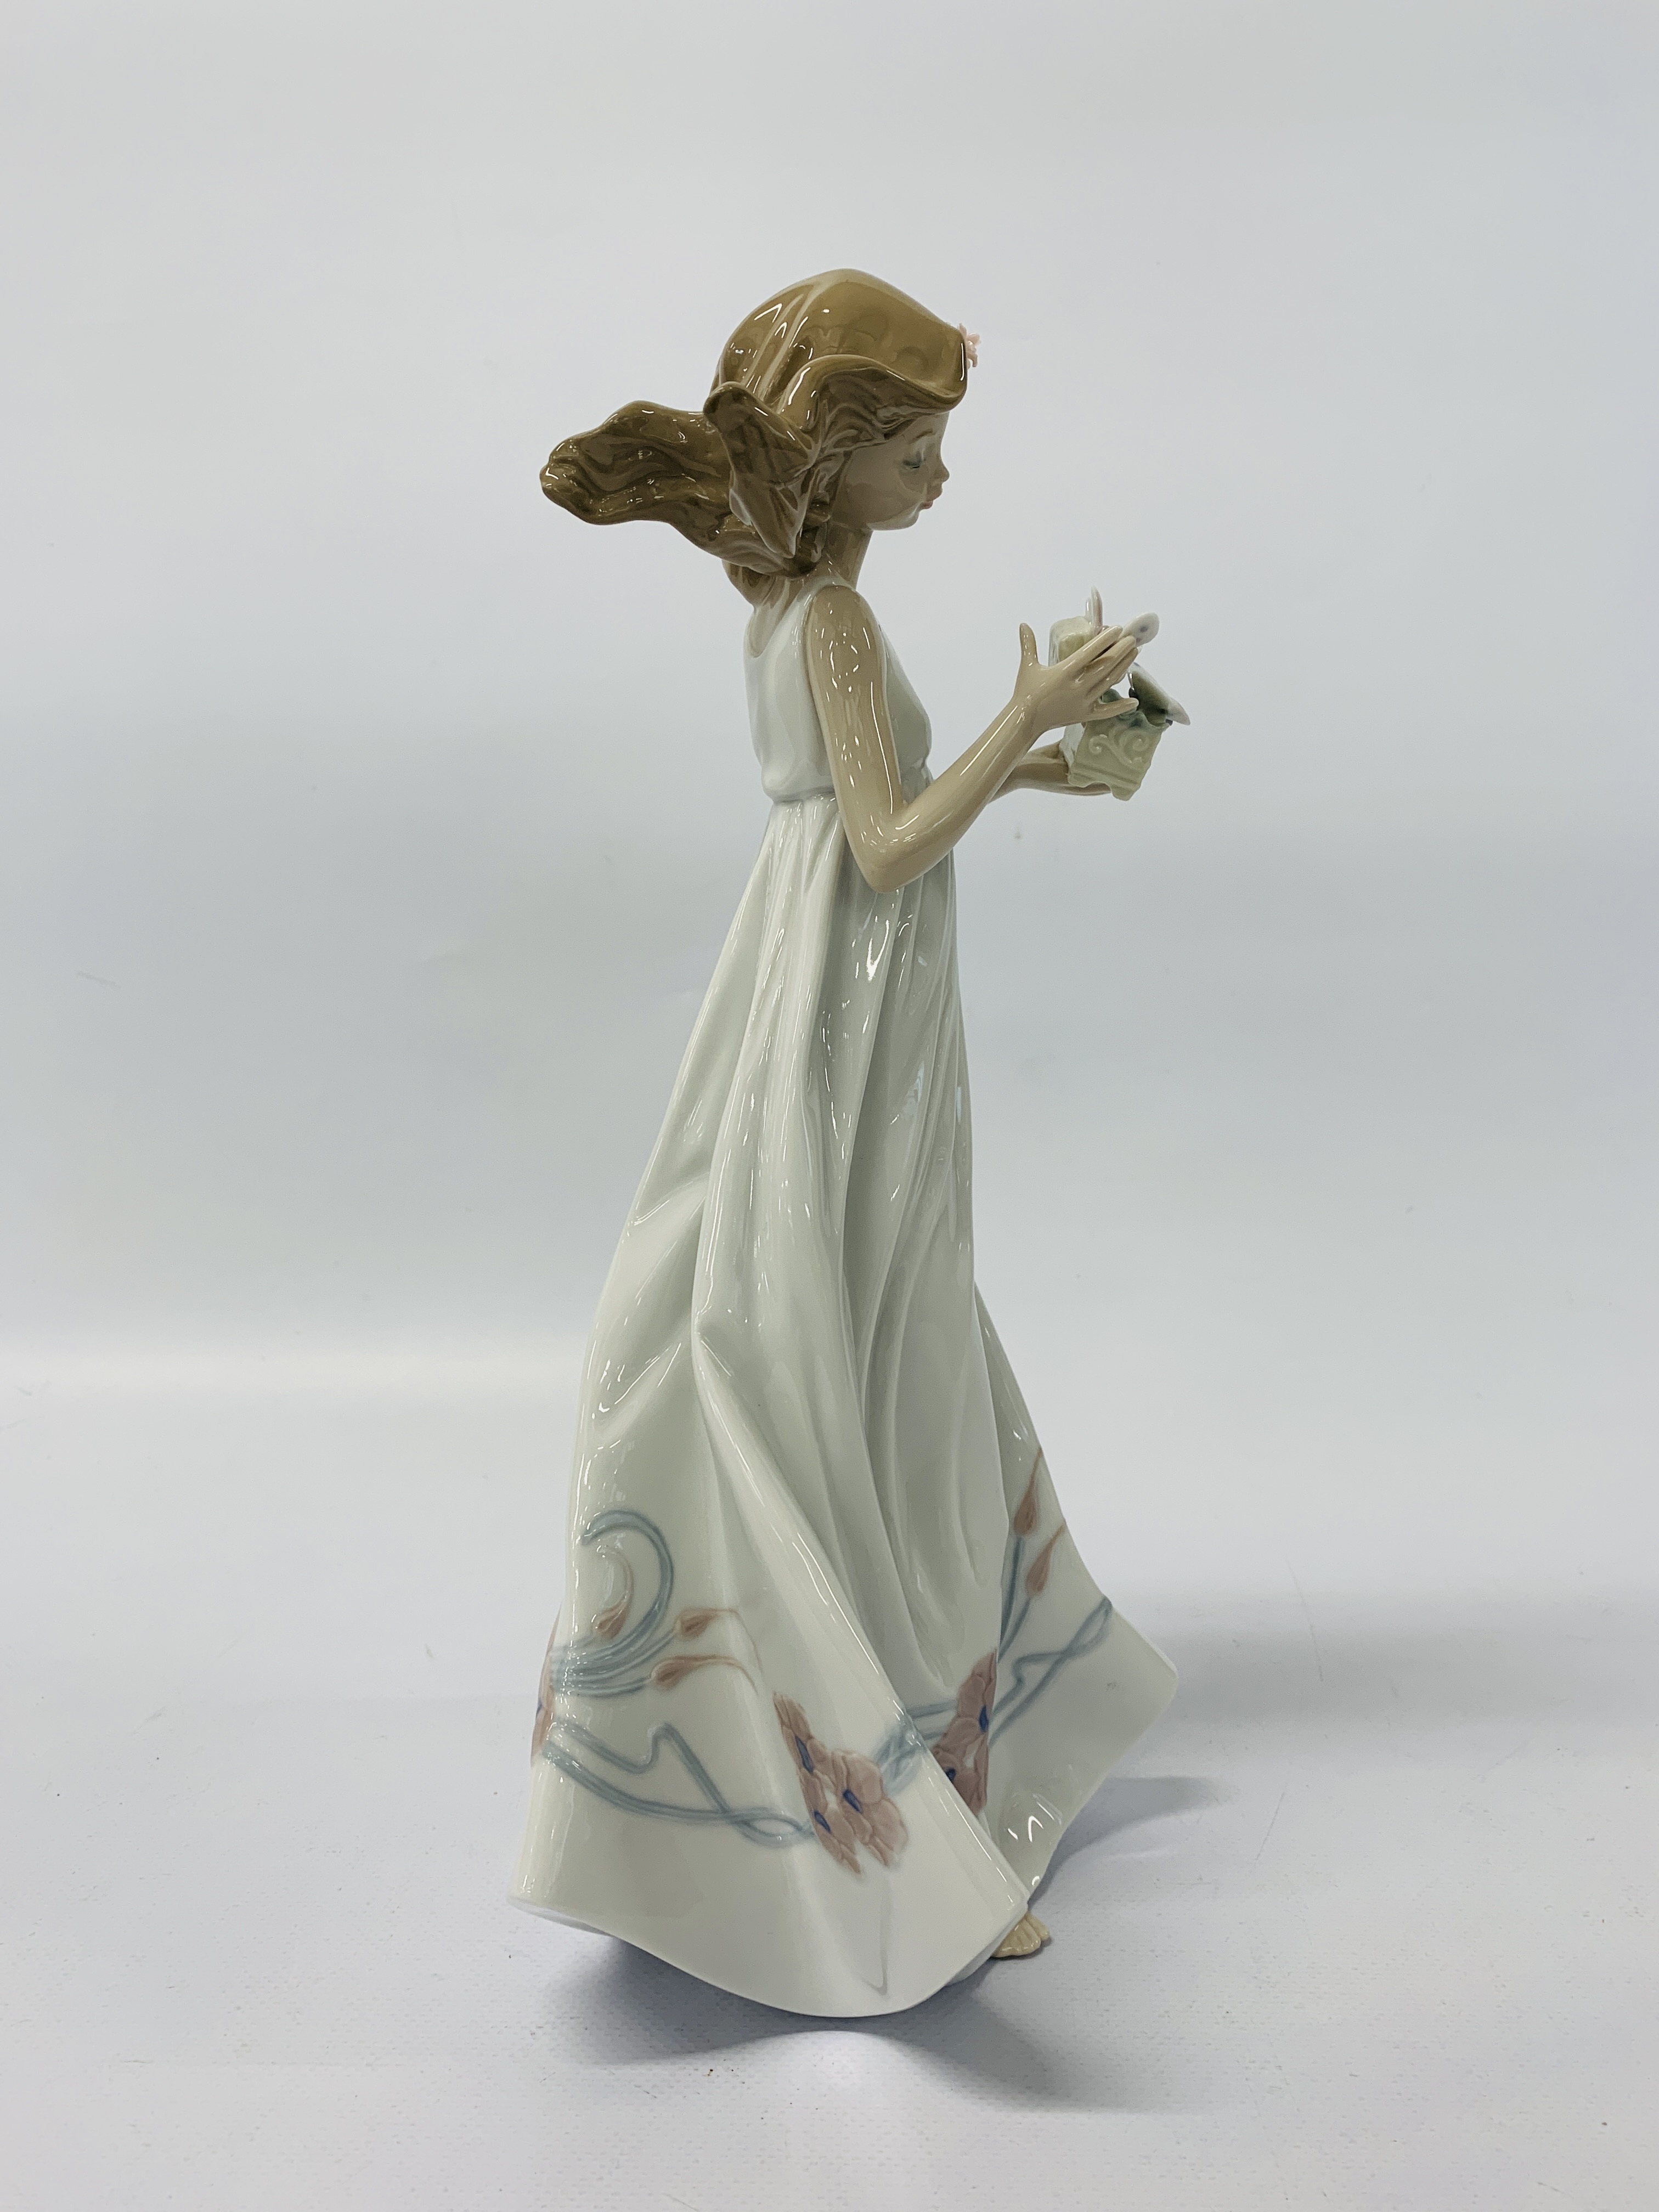 LLADRO FIGURINE 6777 "BUTTERFLY TREASURES" 32 CM. - Image 4 of 7